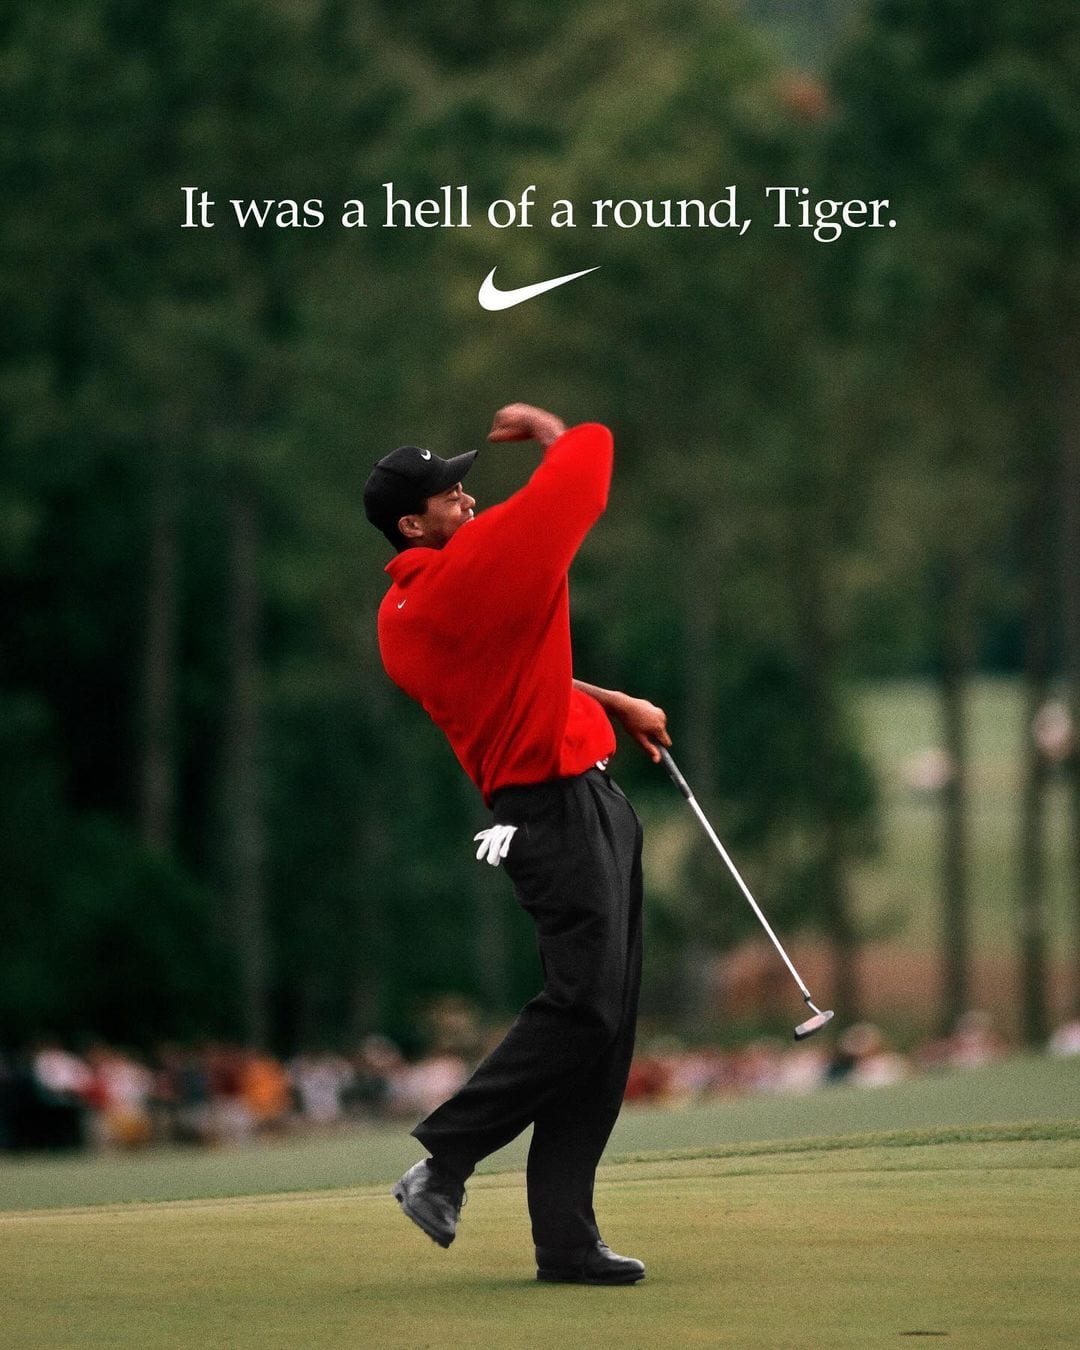 Nike's post for Tiger Woods on Instagram